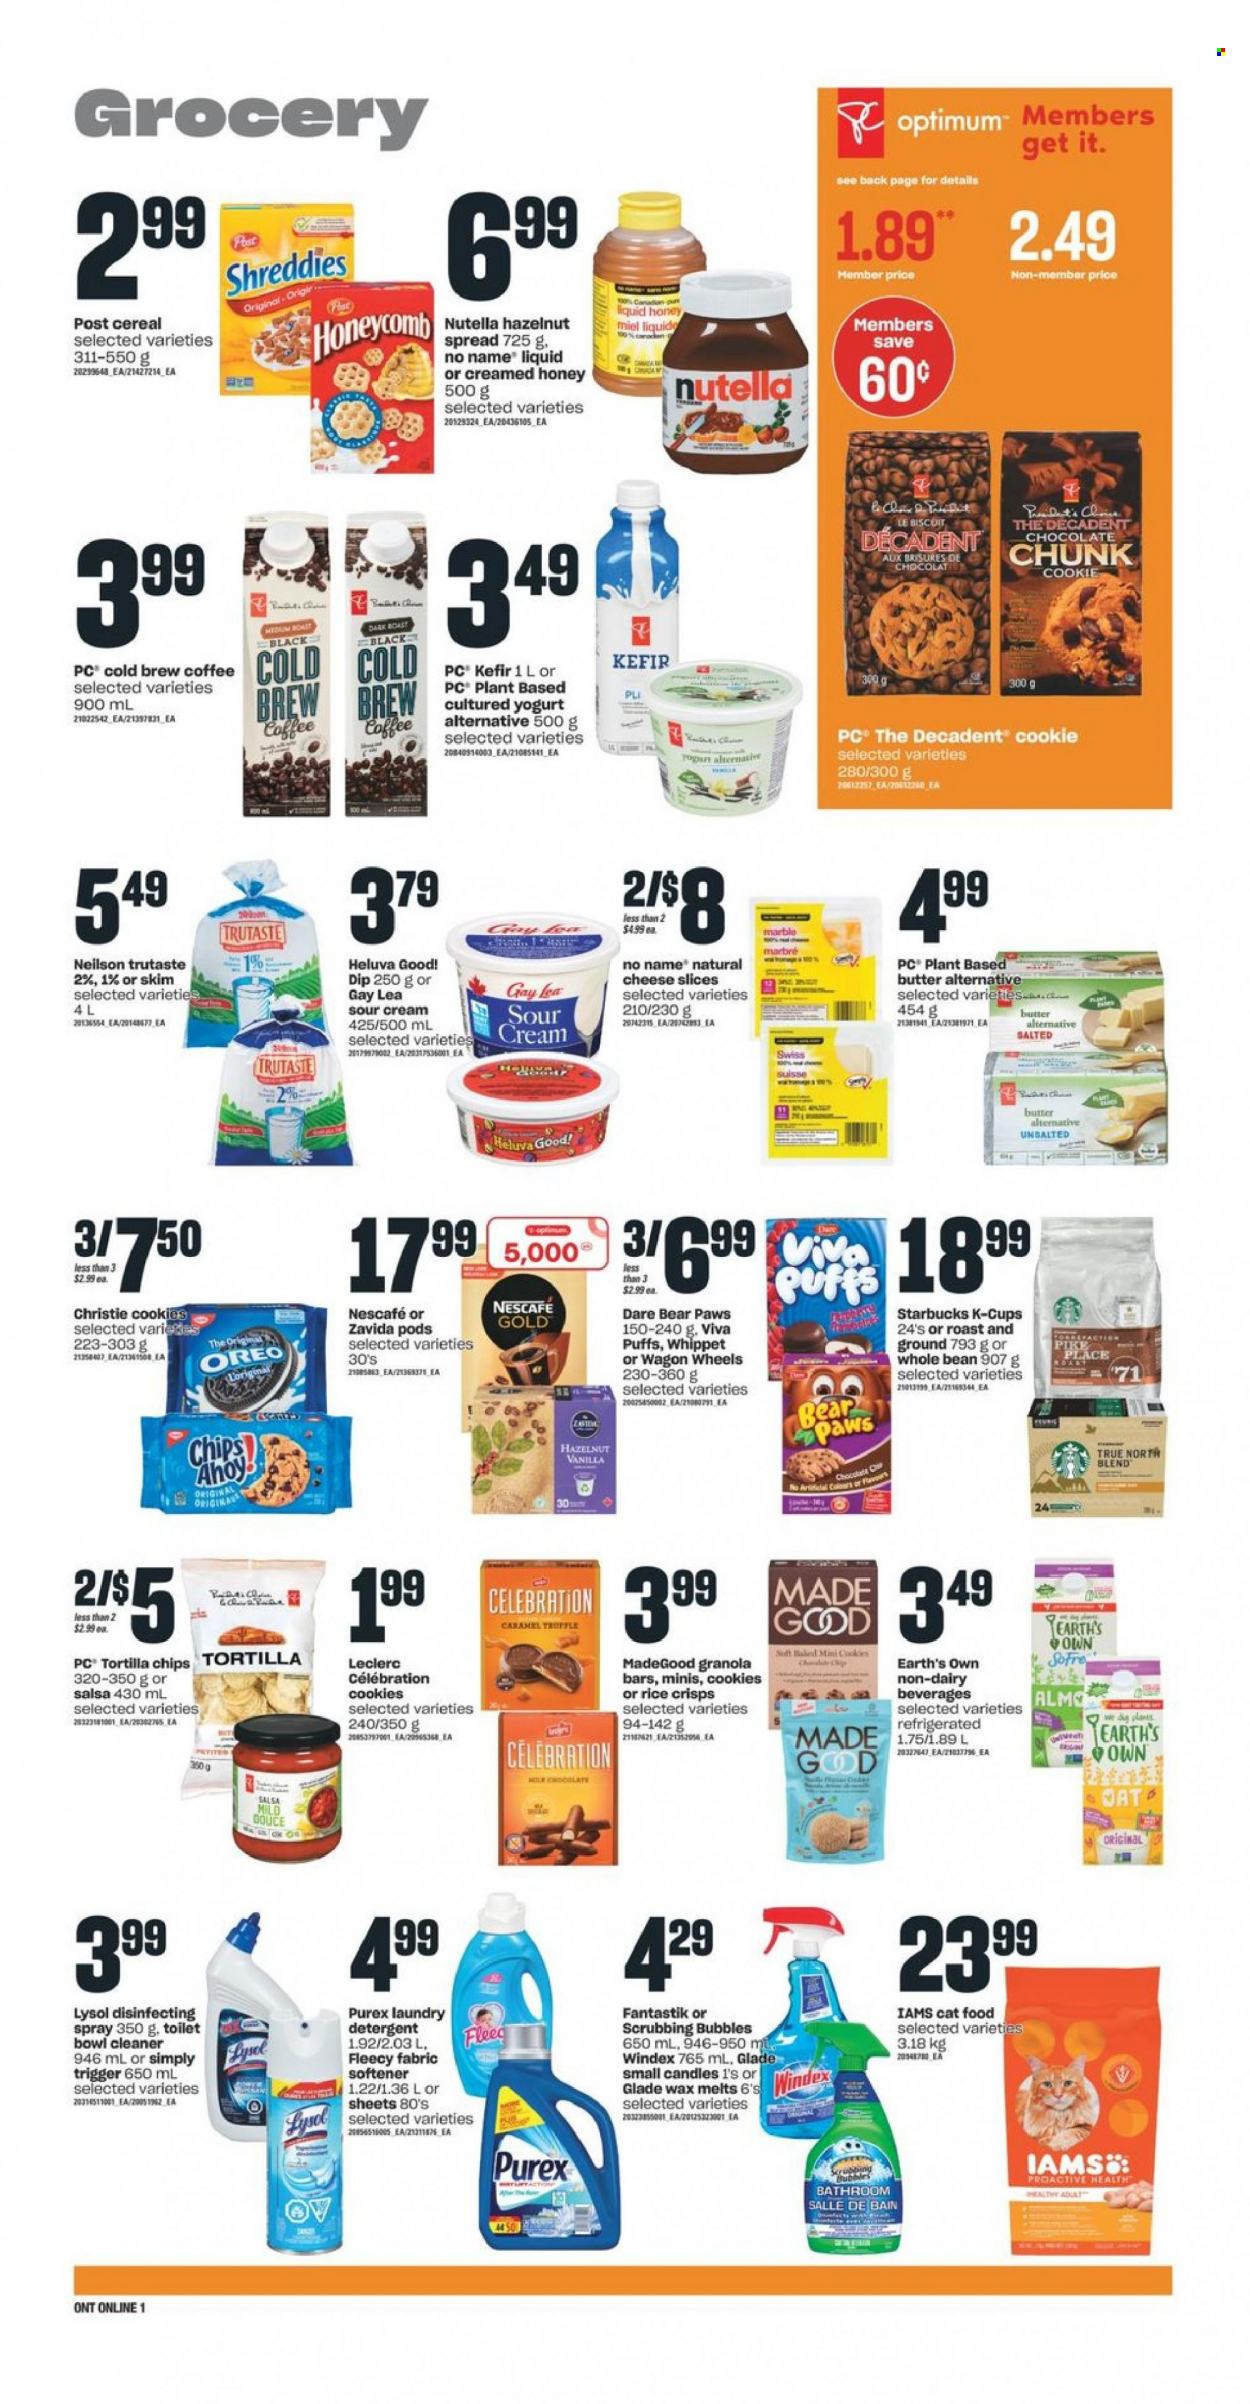 thumbnail - Independent Flyer - June 30, 2022 - July 06, 2022 - Sales products - puffs, No Name, sliced cheese, cheese, Président, yoghurt, Milo, kefir, butter, sour cream, dip, cookies, chocolate, truffles, Celebration, biscuit, tortilla chips, chips, rice crisps, cereals, granola bar, rice, salsa, honey, hazelnut spread, coffee, coffee capsules, Starbucks, K-Cups, Windex, Scrubbing Bubbles, cleaner, Lysol, fabric softener, laundry detergent, Purex, candle, Glade, animal food, Paws, cat food, Optimum, Iams, wagon, detergent, Nutella, Oreo, Nescafé. Page 5.